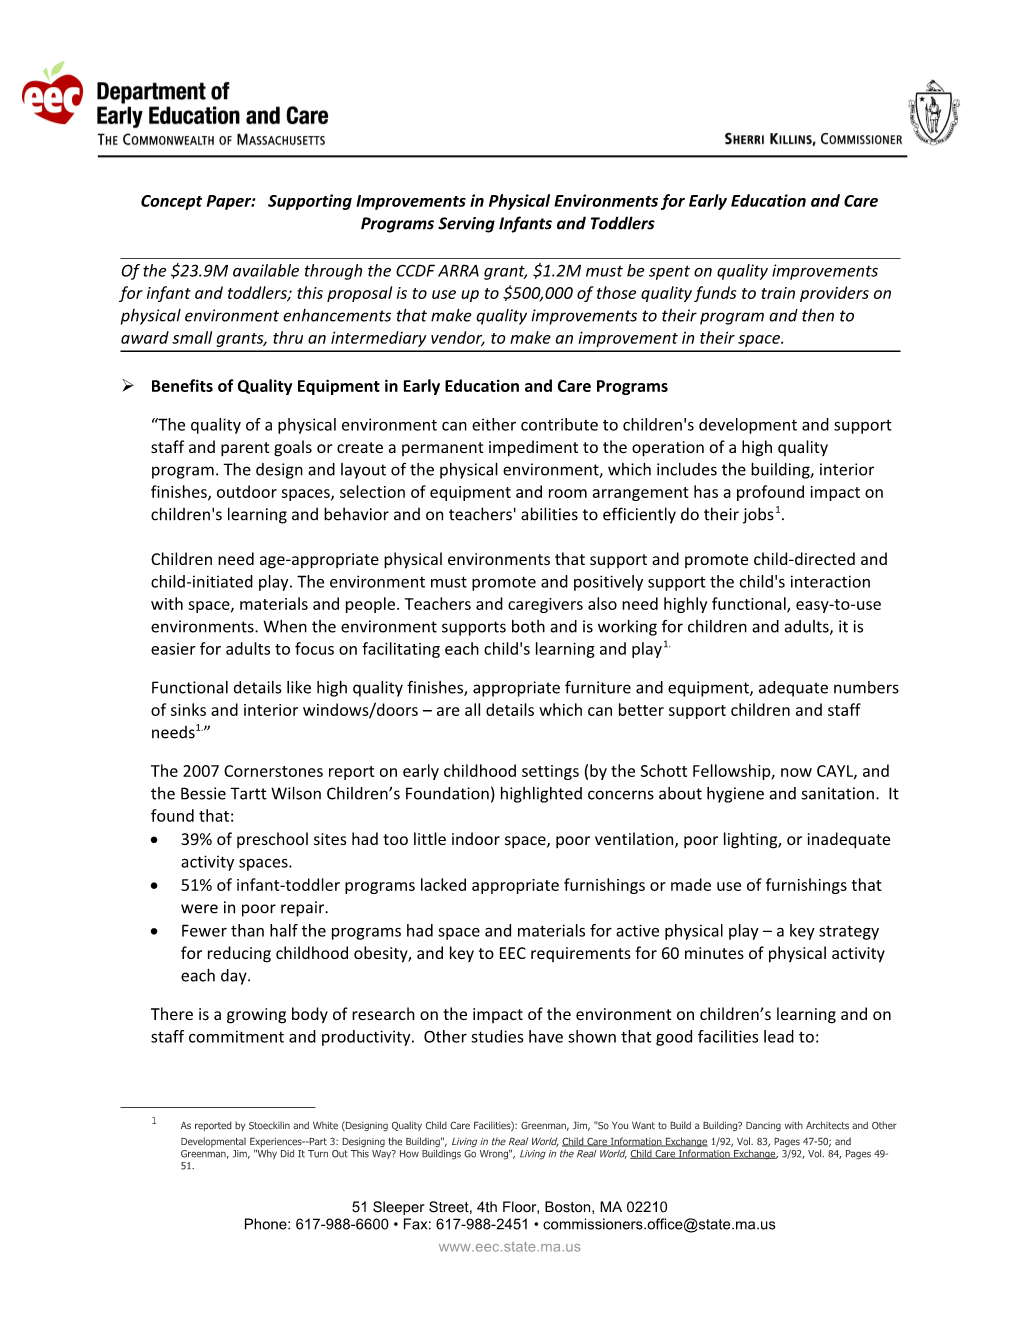 Concept Paper: Supporting Improvements in Physical Environments for Early Education And